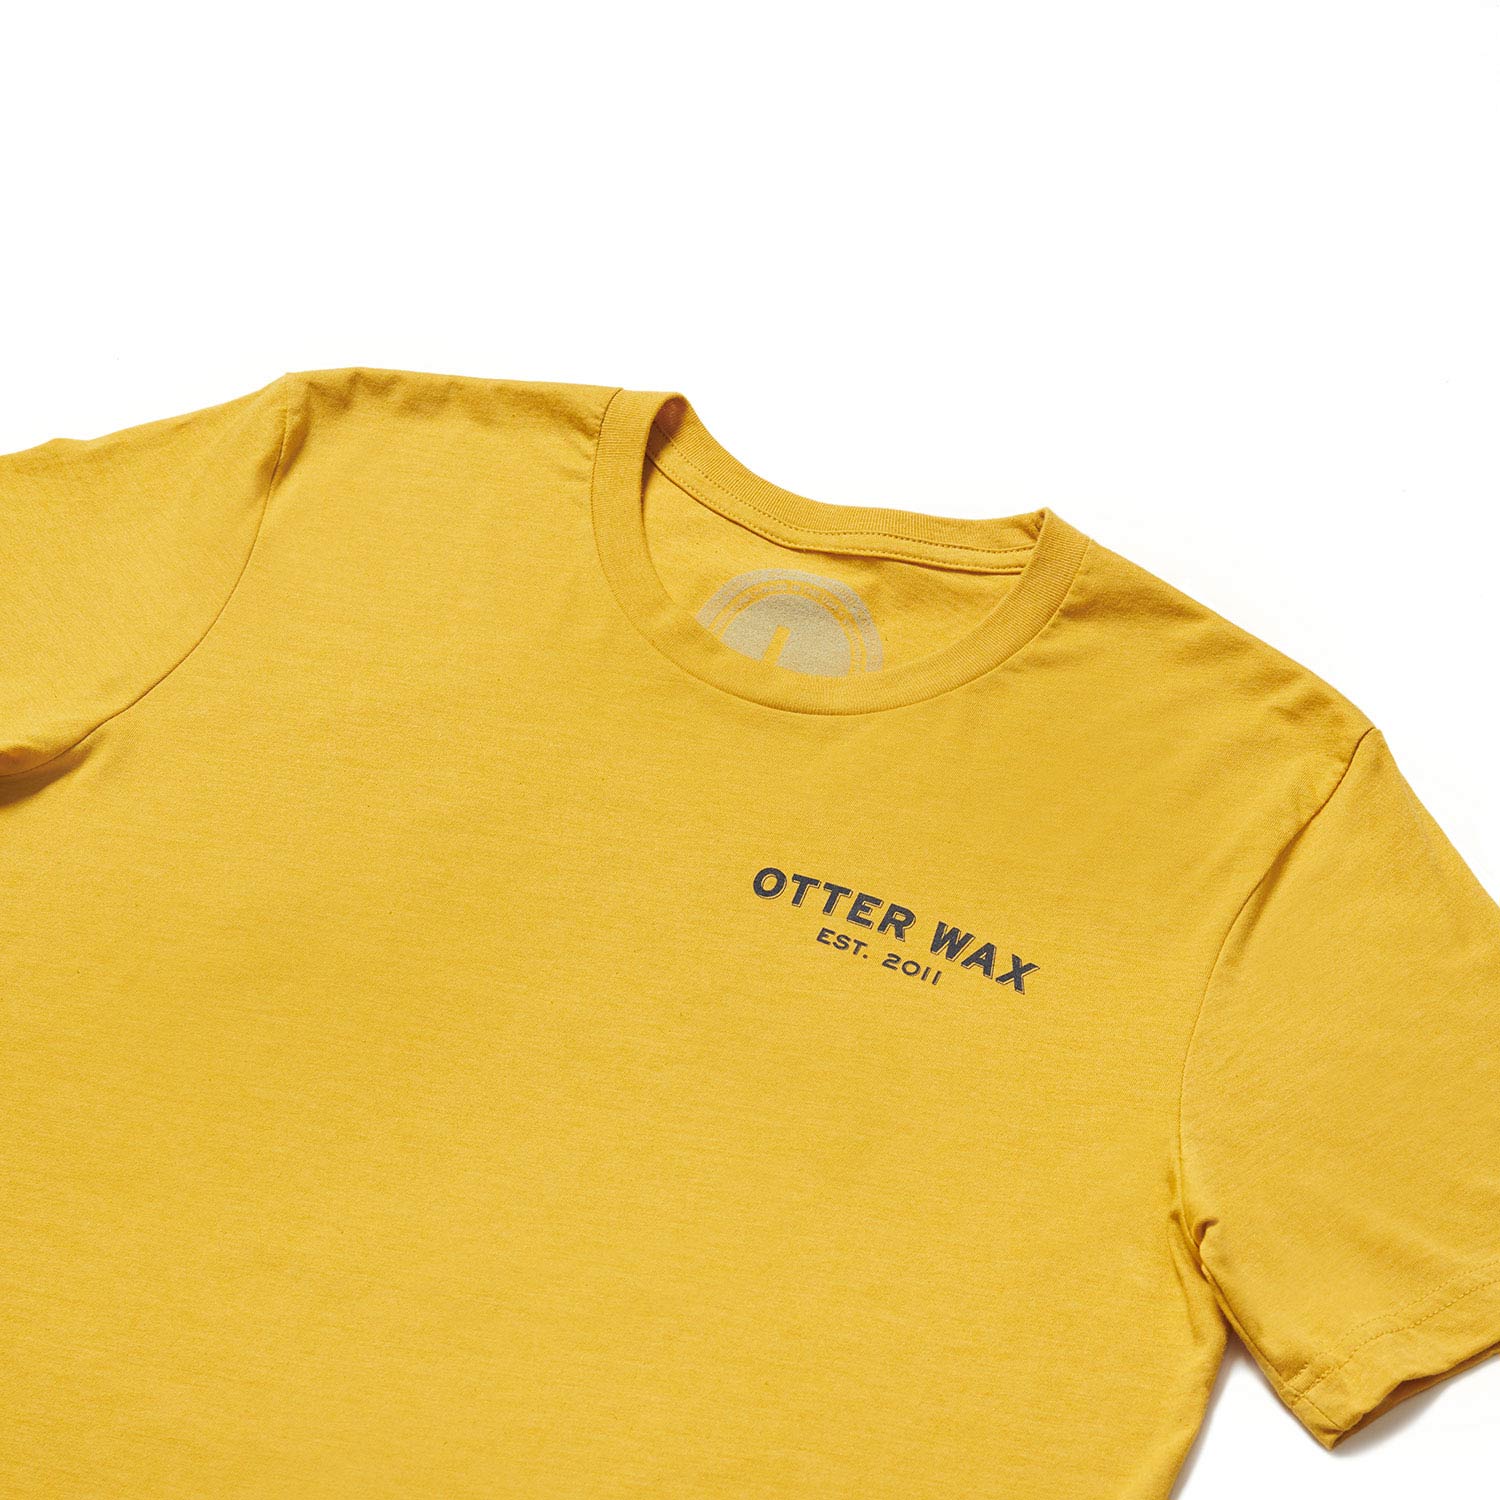 Otter Wax Made In The USA Logo T-Shirt In Mustard Yellow Cotton Fabric And Navy Blue Screenprint